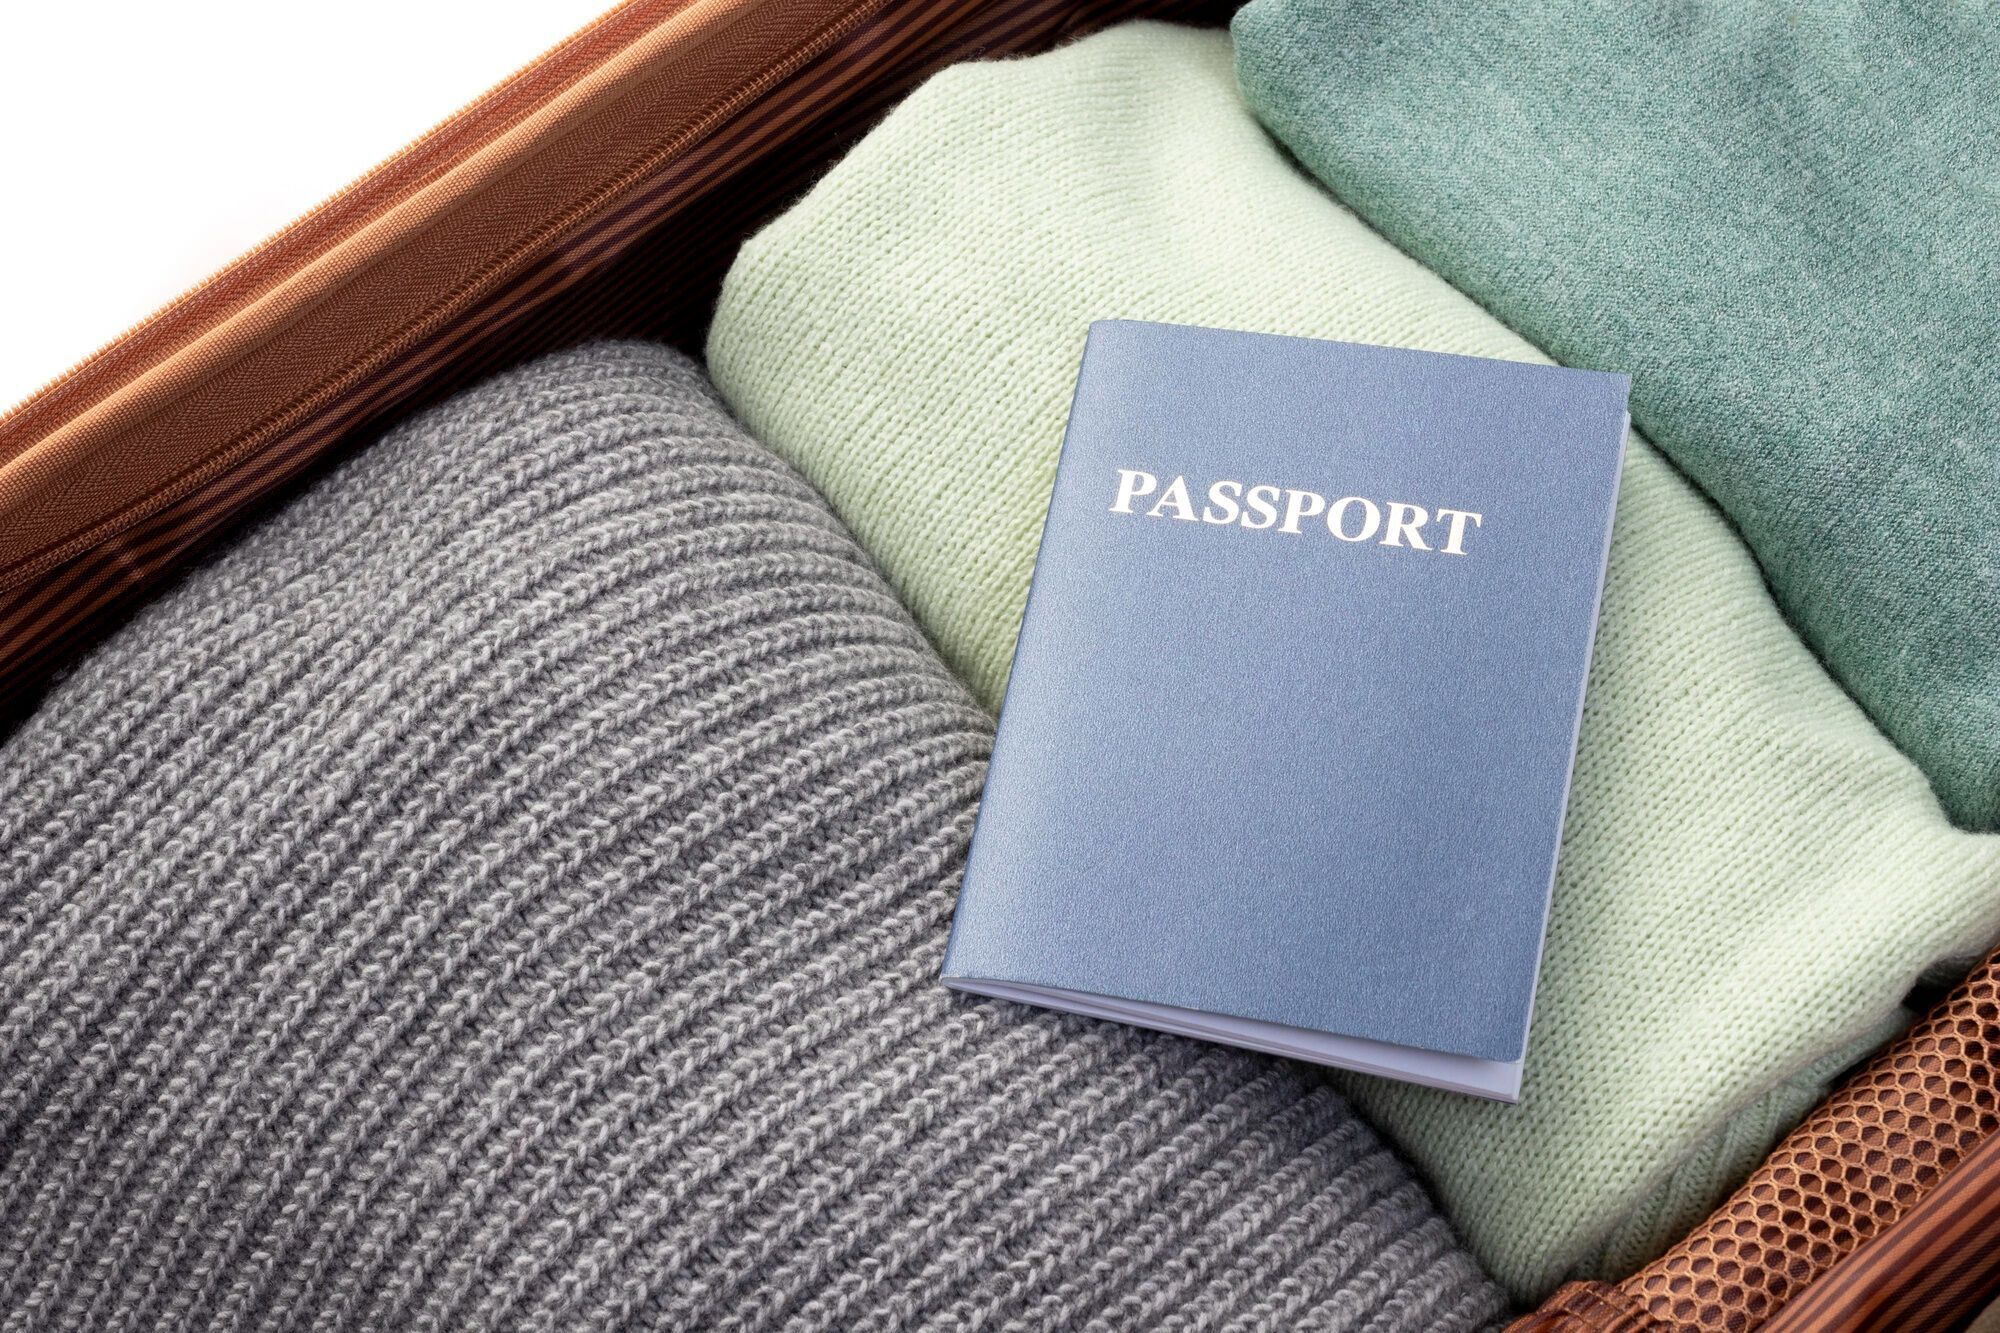 Why you should check your passport before traveling and what to look for